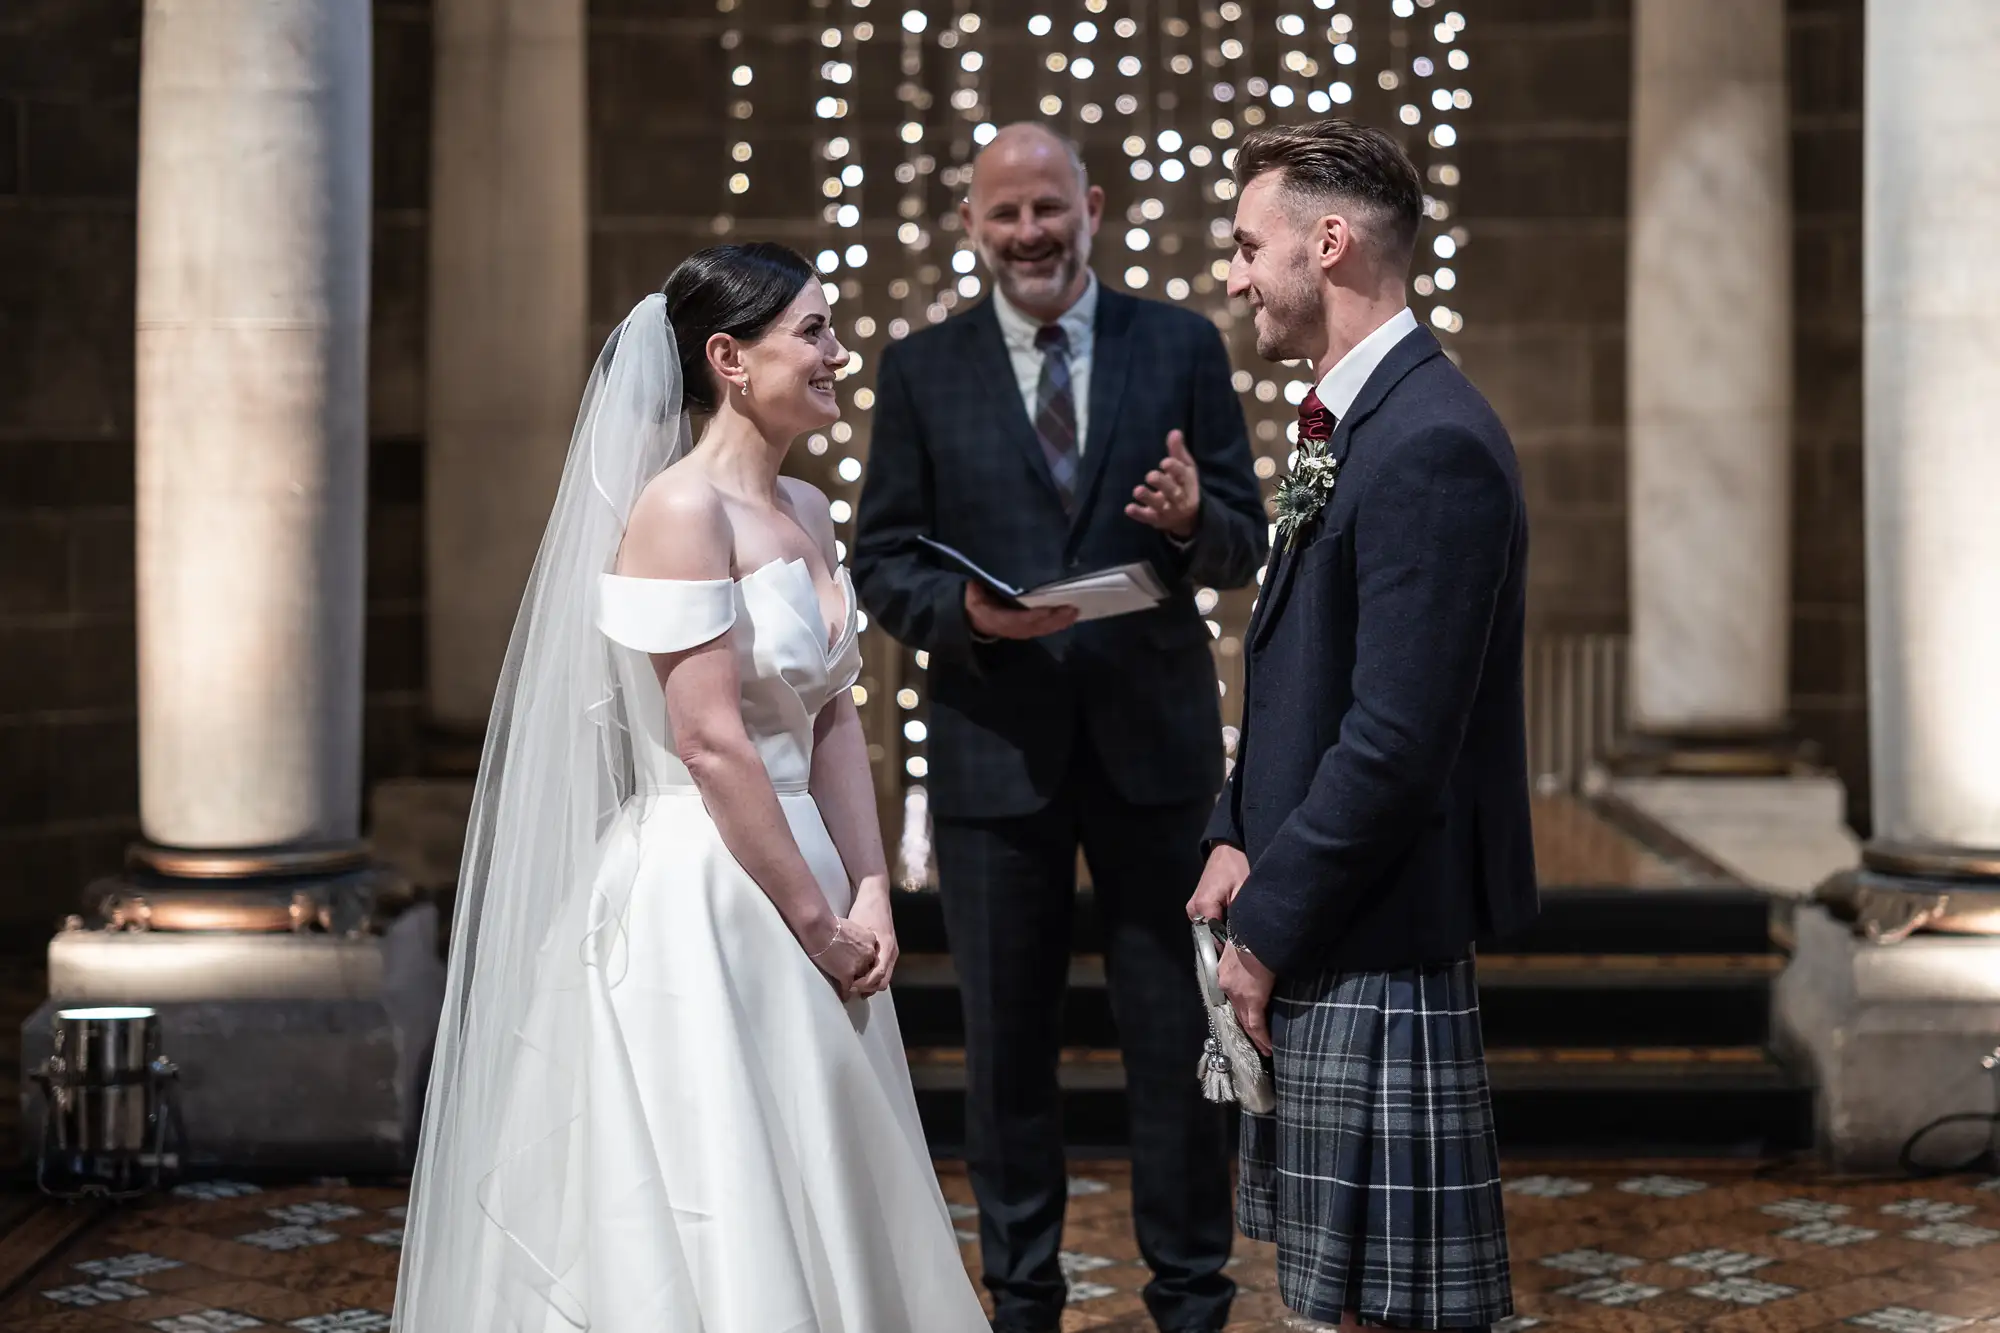 A bride in a white gown and a groom in a kilt exchanging vows in a church, with an officiant smiling behind them and fairy lights in the background.